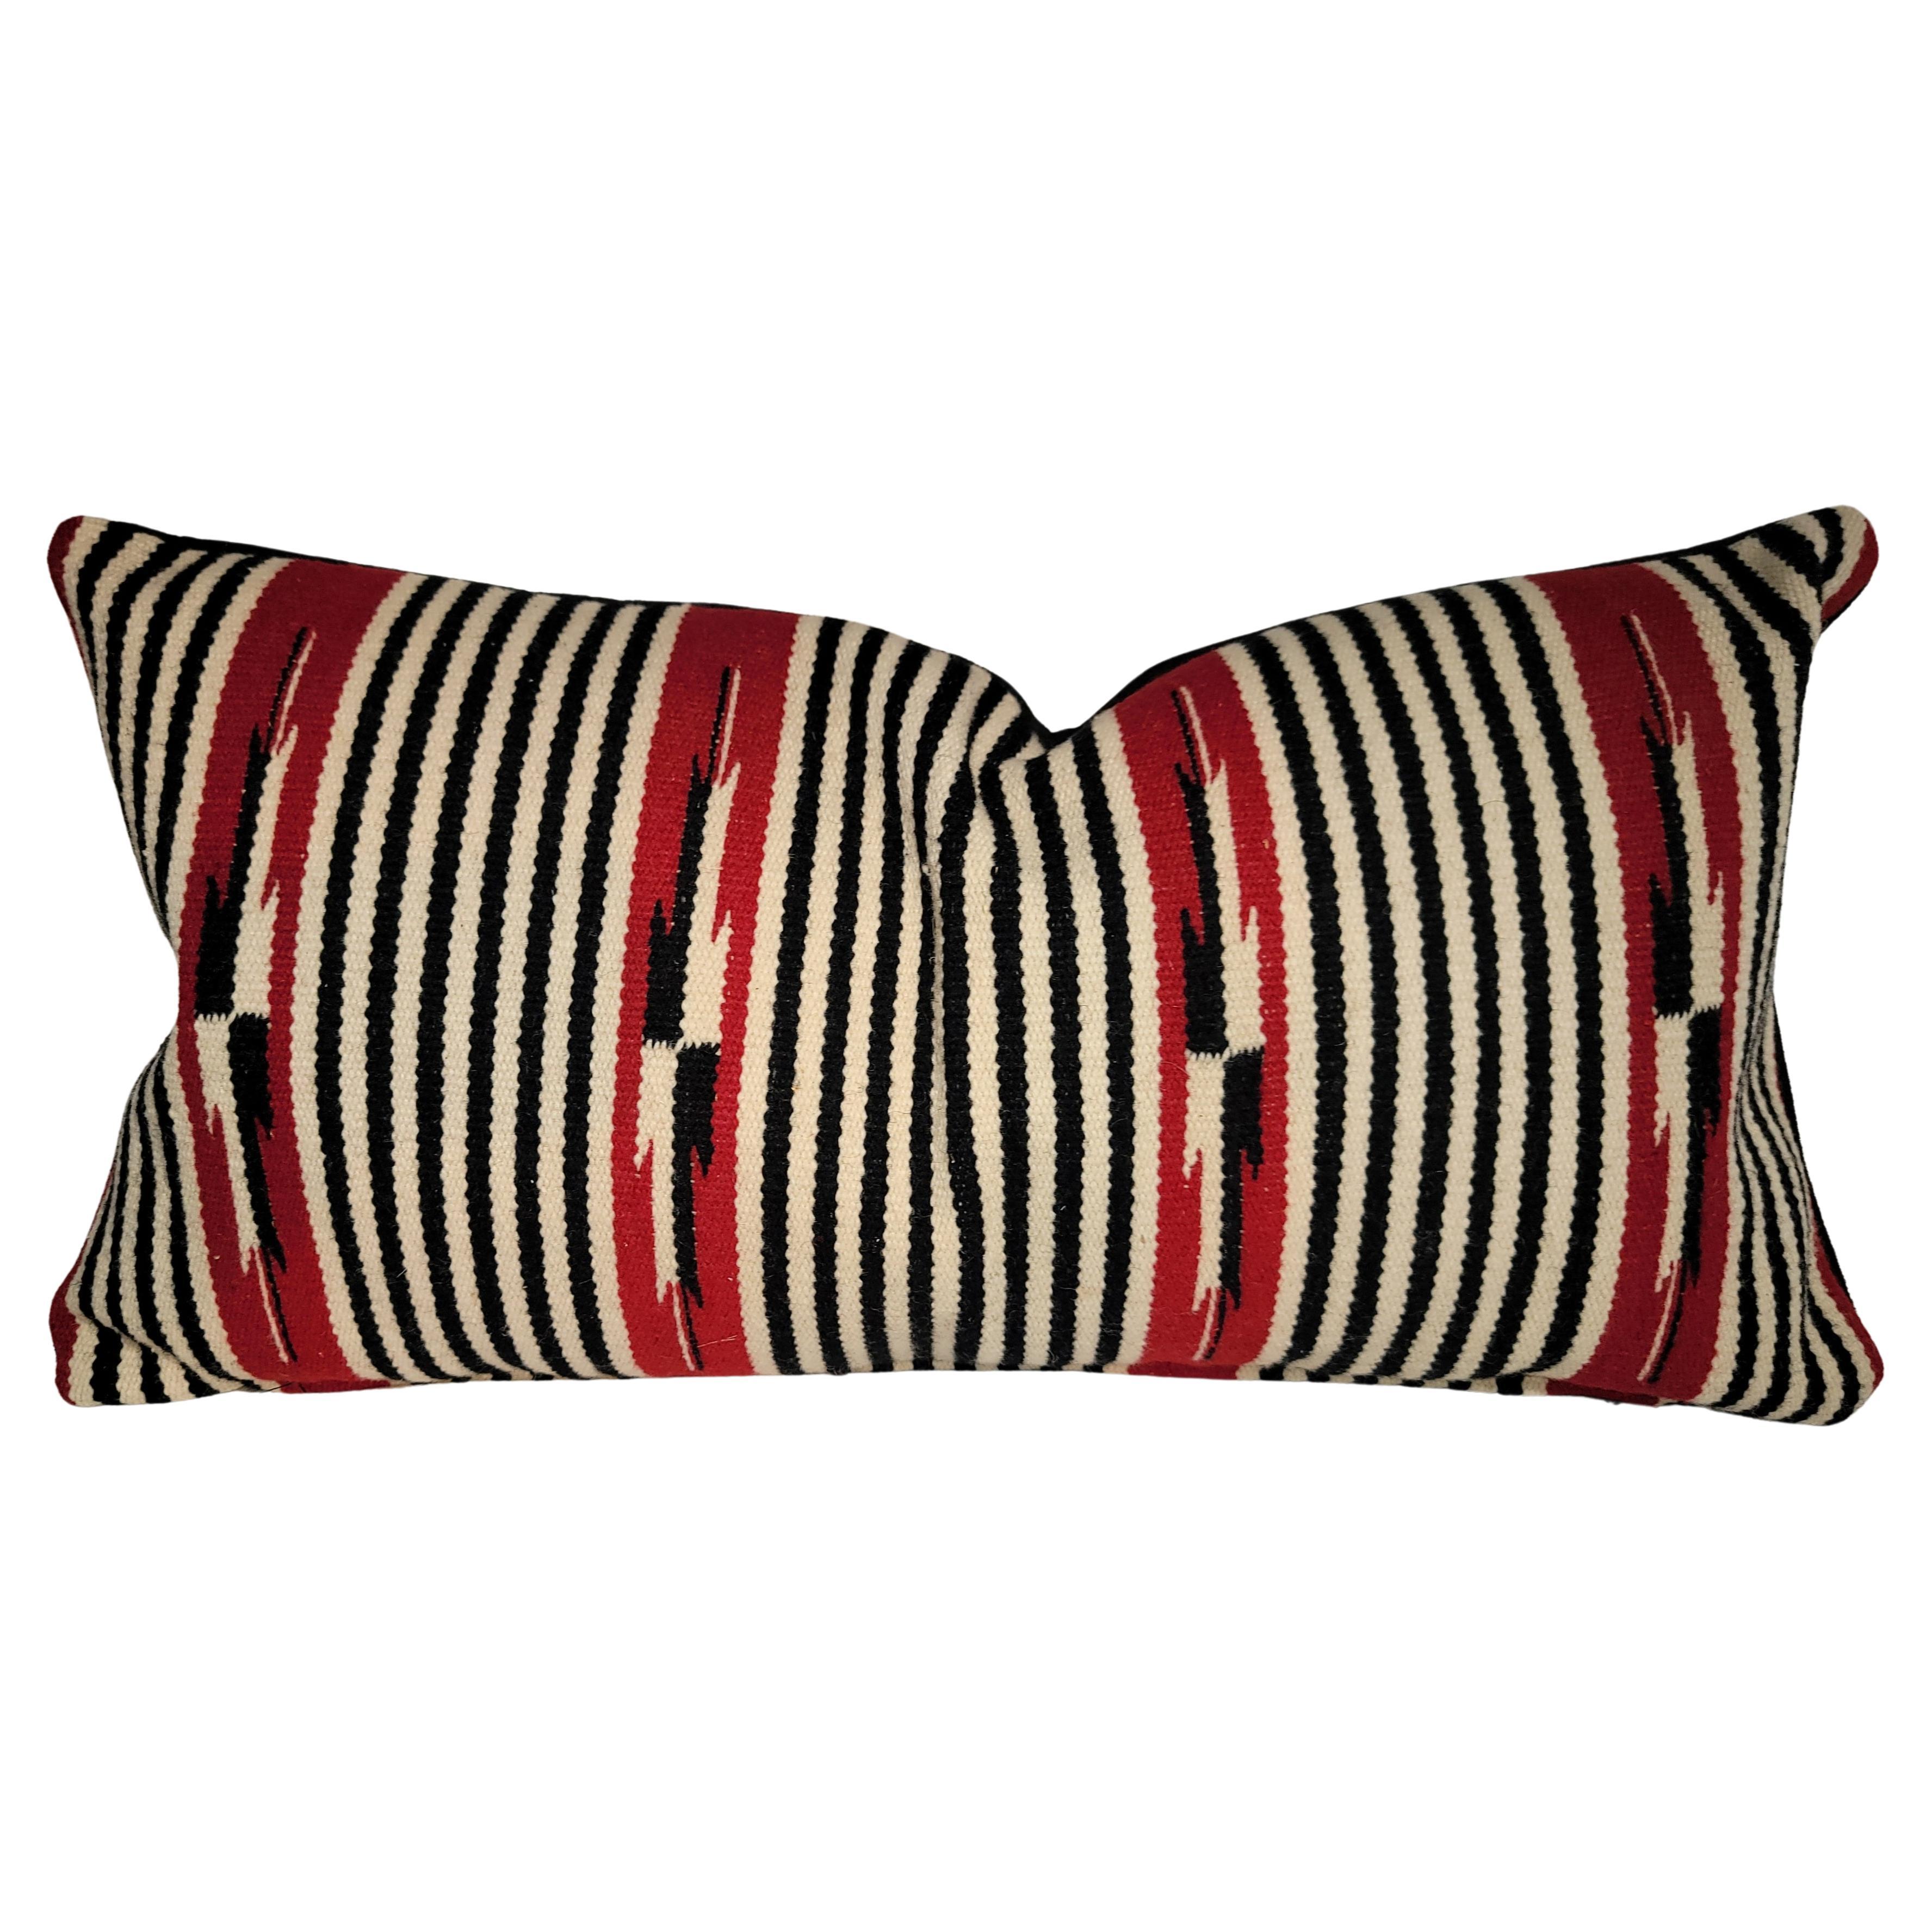 Navajo Indian Weaving Pillow With Suede Backing For Sale